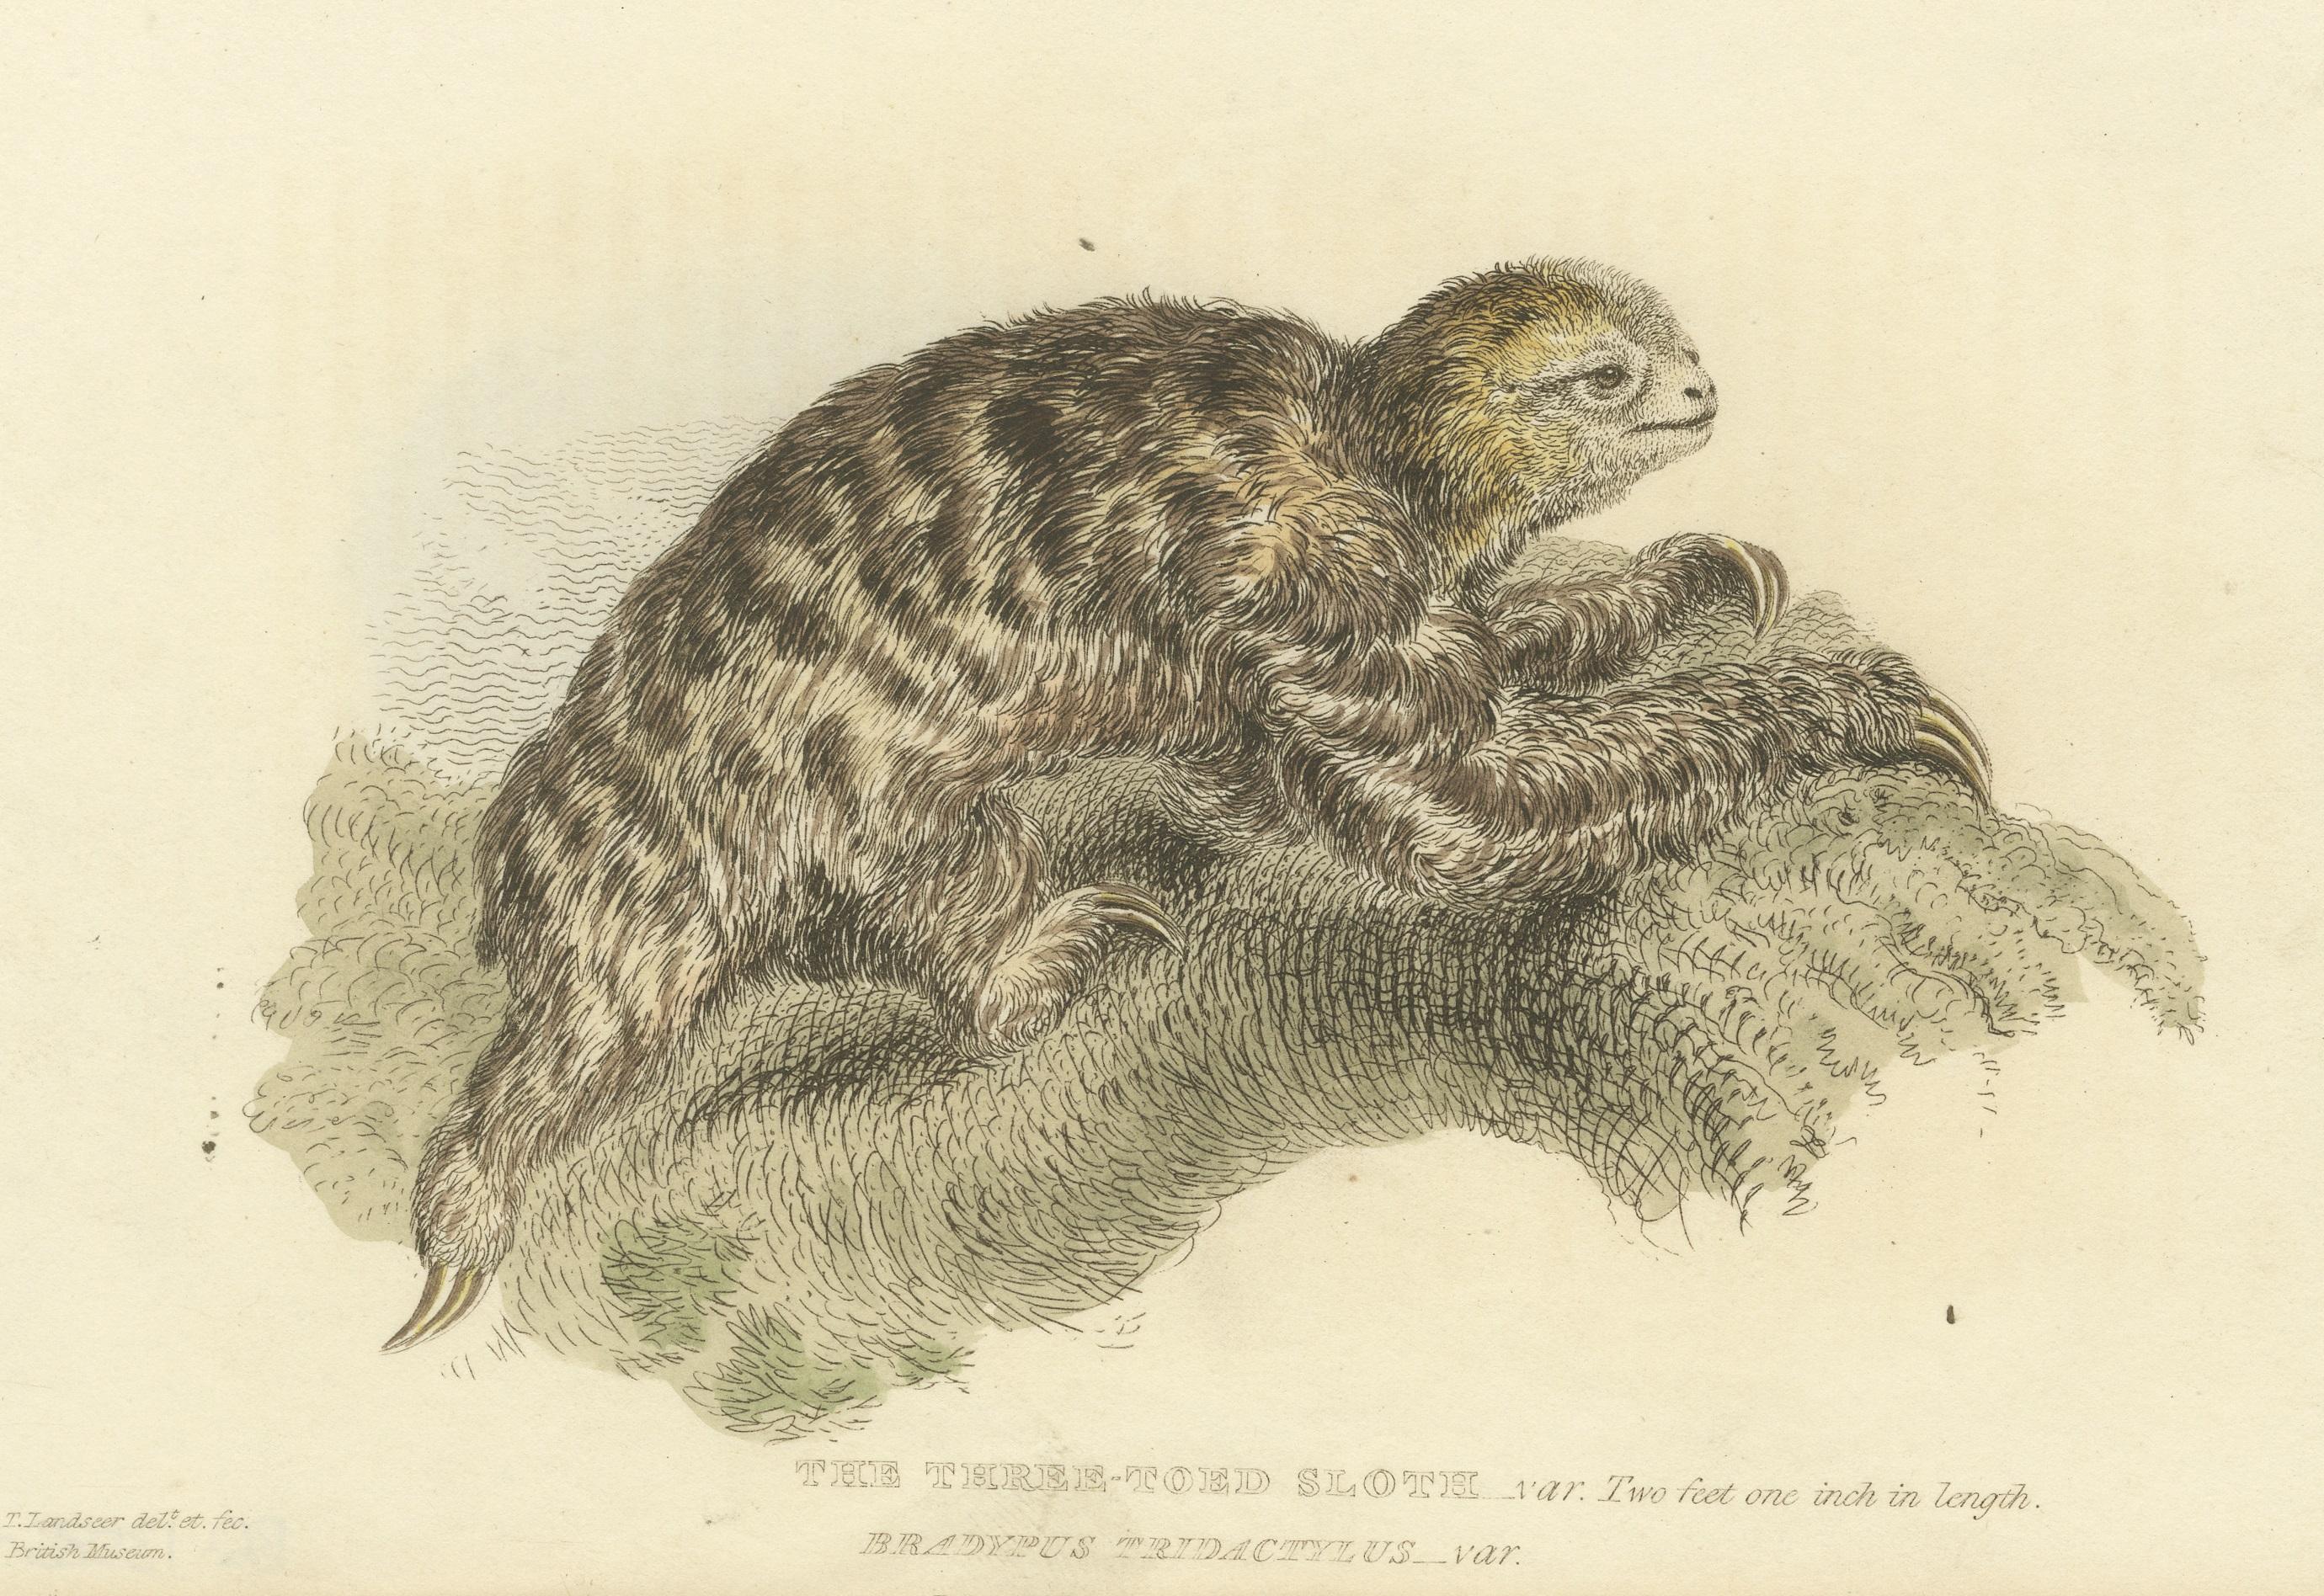 Paper Antique Print with Hand Coloring of a Three-Toed Sloth For Sale